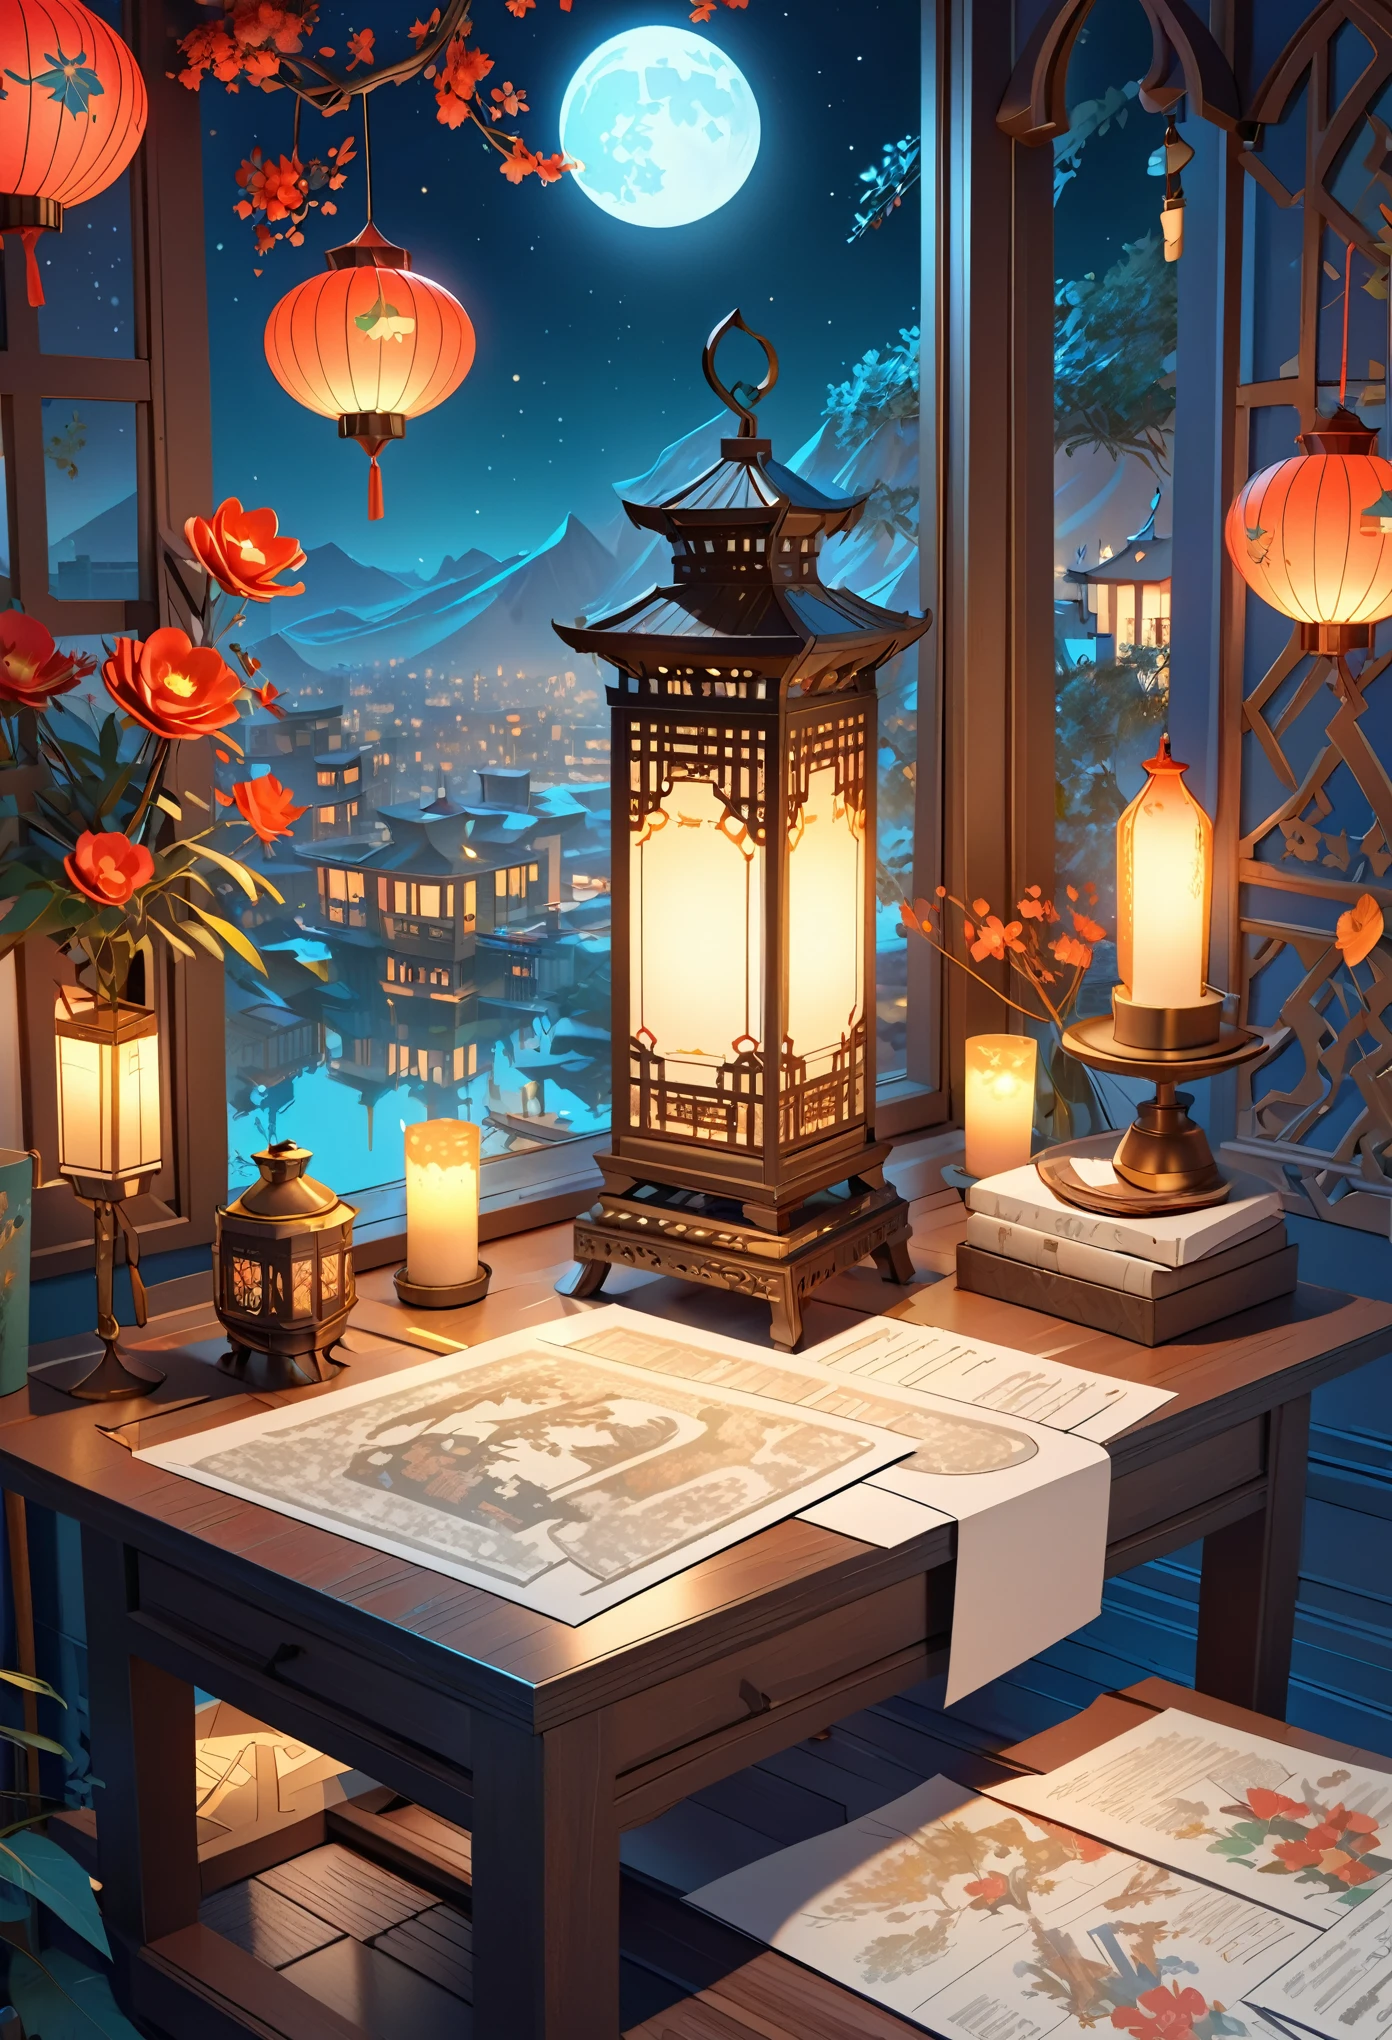 a lantern that is sitting on top of a table, ✨🕌🌙, ash thorp khyzyl saleem, intricate 3 d illustration, exquisite digital illustration, night with moon and candle, intricate detailed digital art, paper modeling art, lantern, cgsociety 9, stunning digital illustration, 3 d illustration, 3d illustration, arabian art, beautiful digital illustration